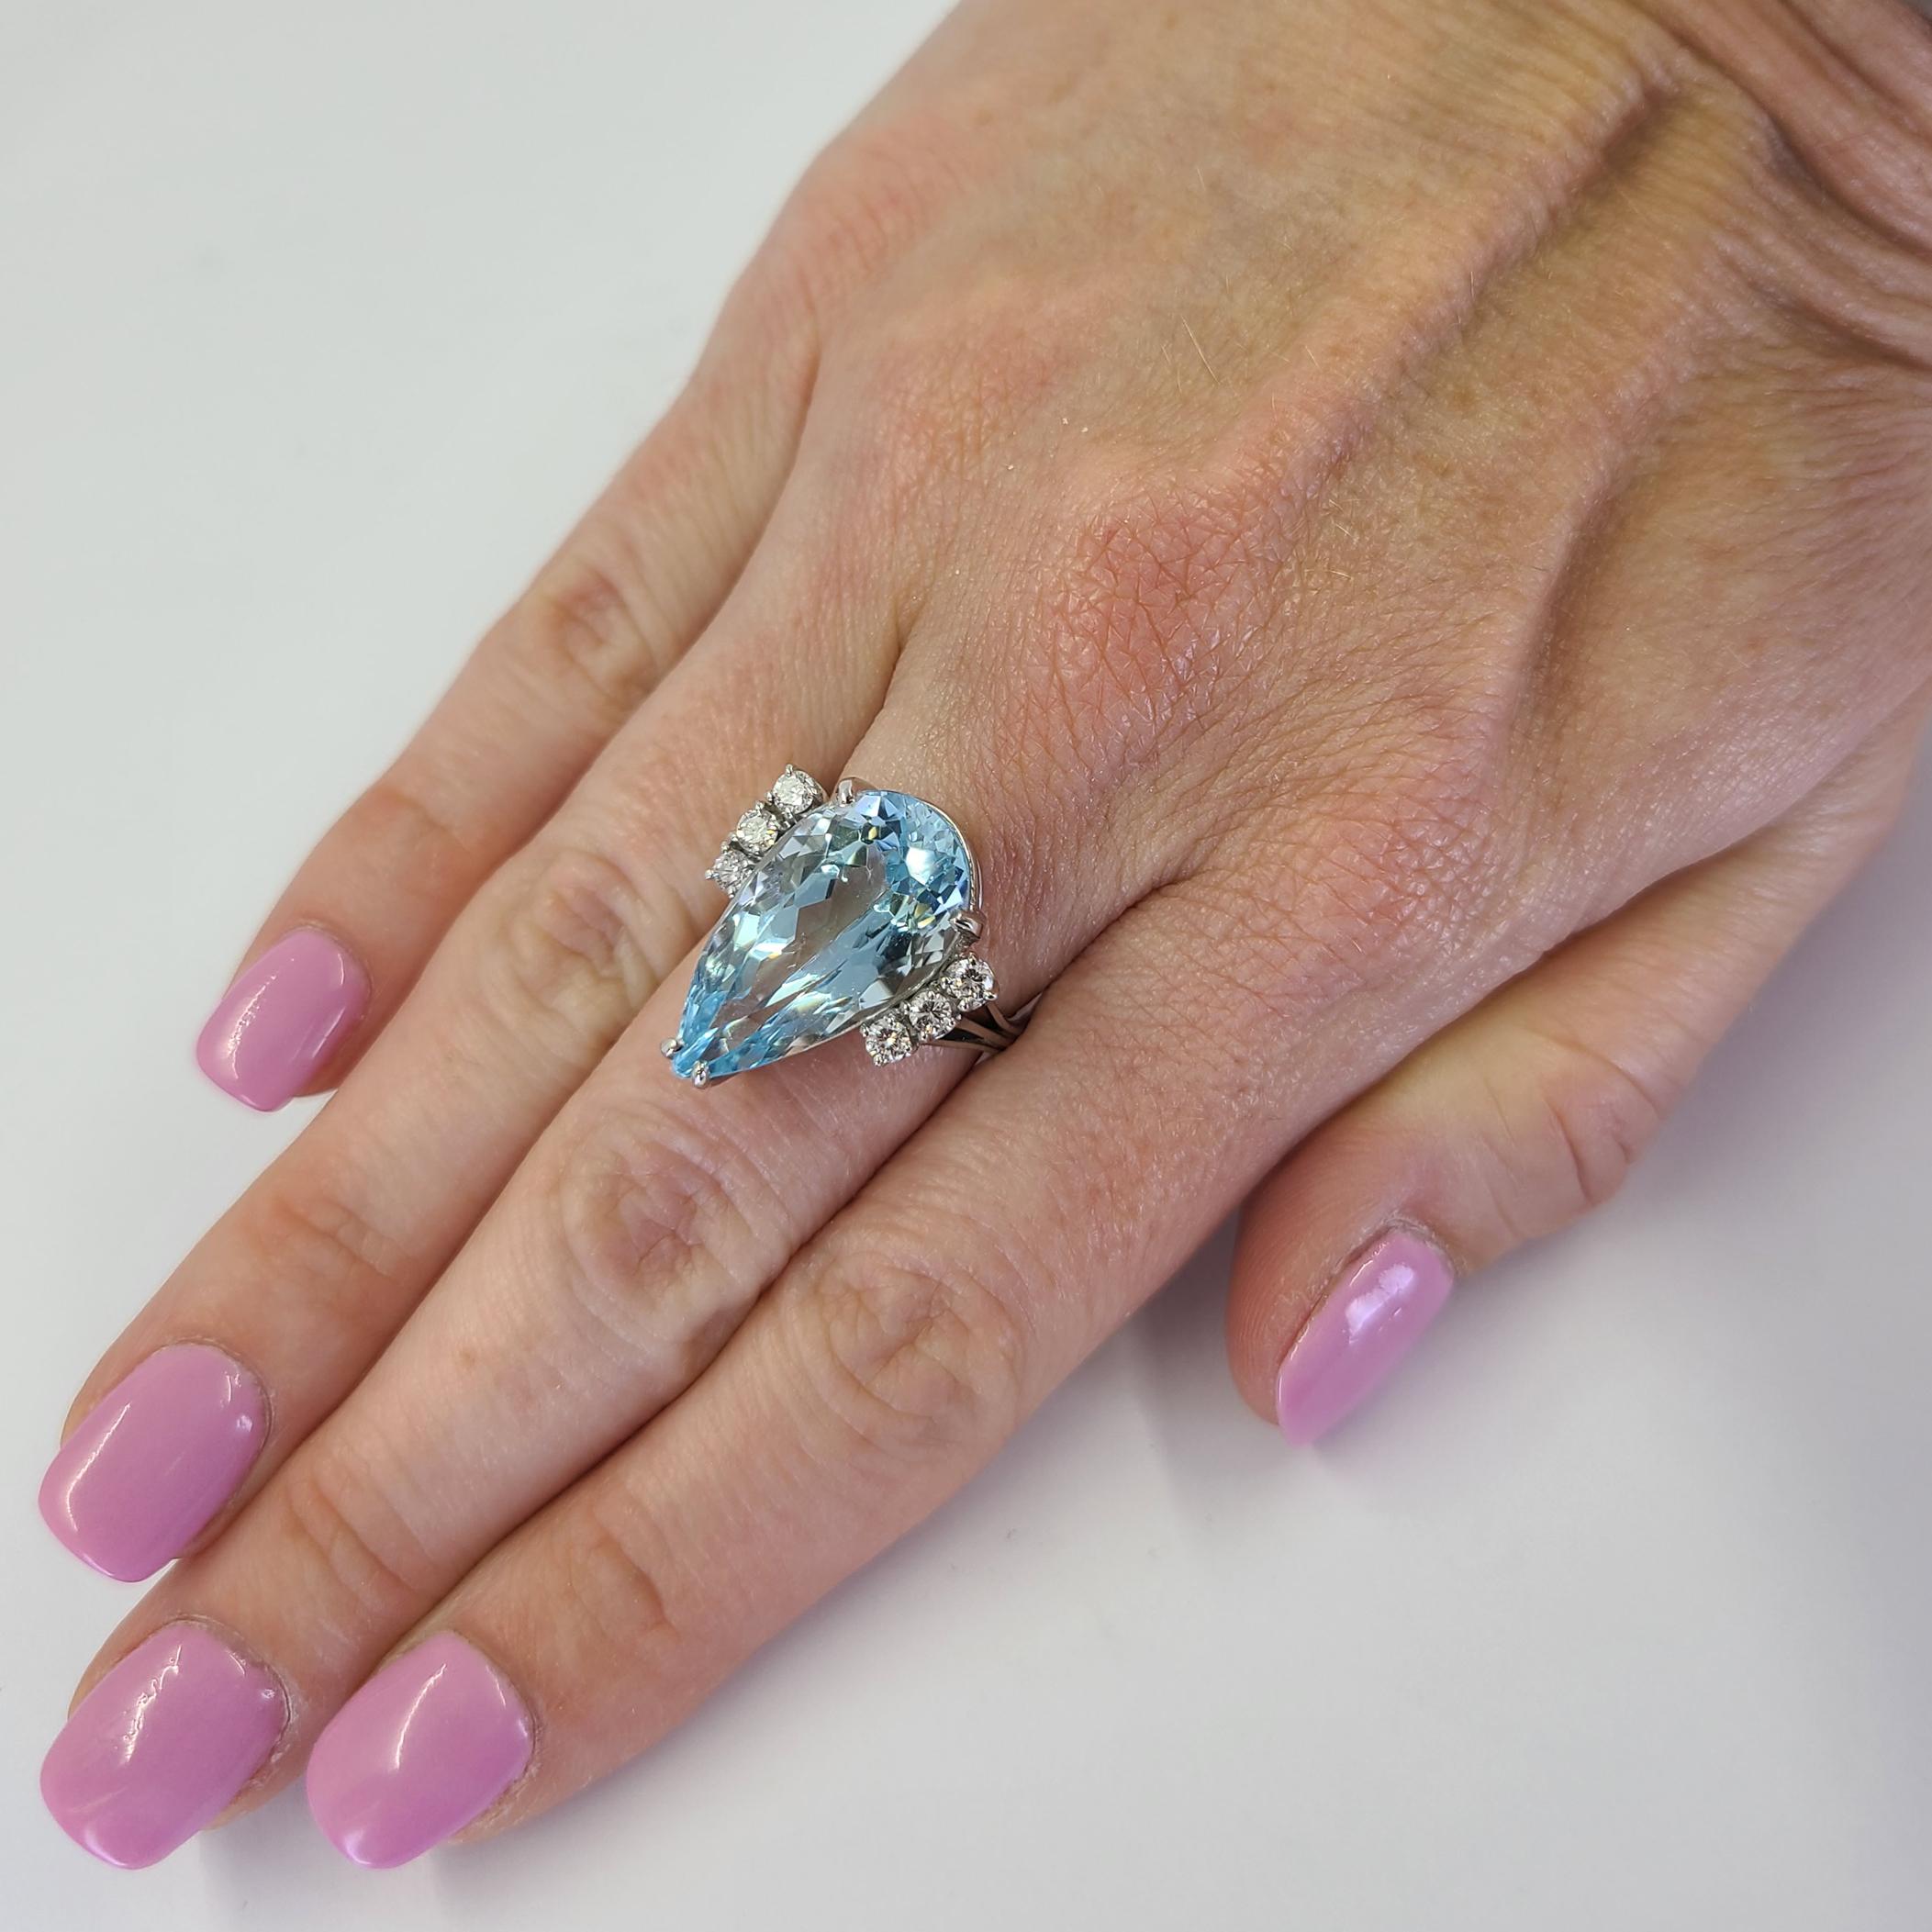 Mayor's 18 Karat White Gold Ring Featuring A 10 Carat Pear Cut Aquamarine Accented By 6 Round Diamonds Of VS Clarity & G Color Totaling 0.50 Carats. Finger Size 5; Purchase Includes One Sizing Service. Finished Weight Is 7.2 Grams.